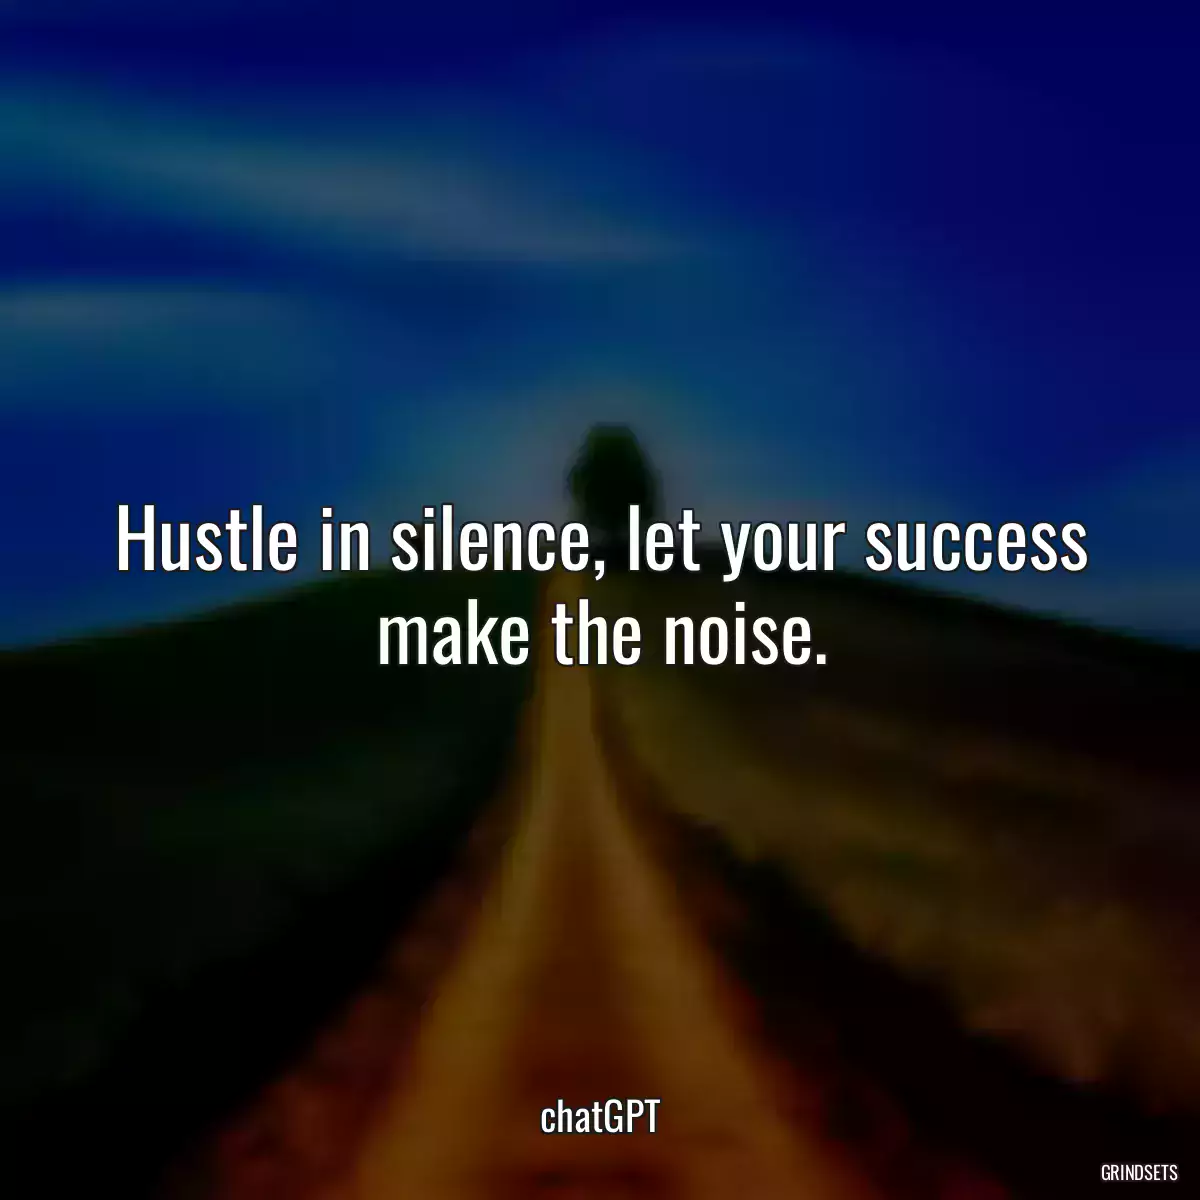 Hustle in silence, let your success make the noise.